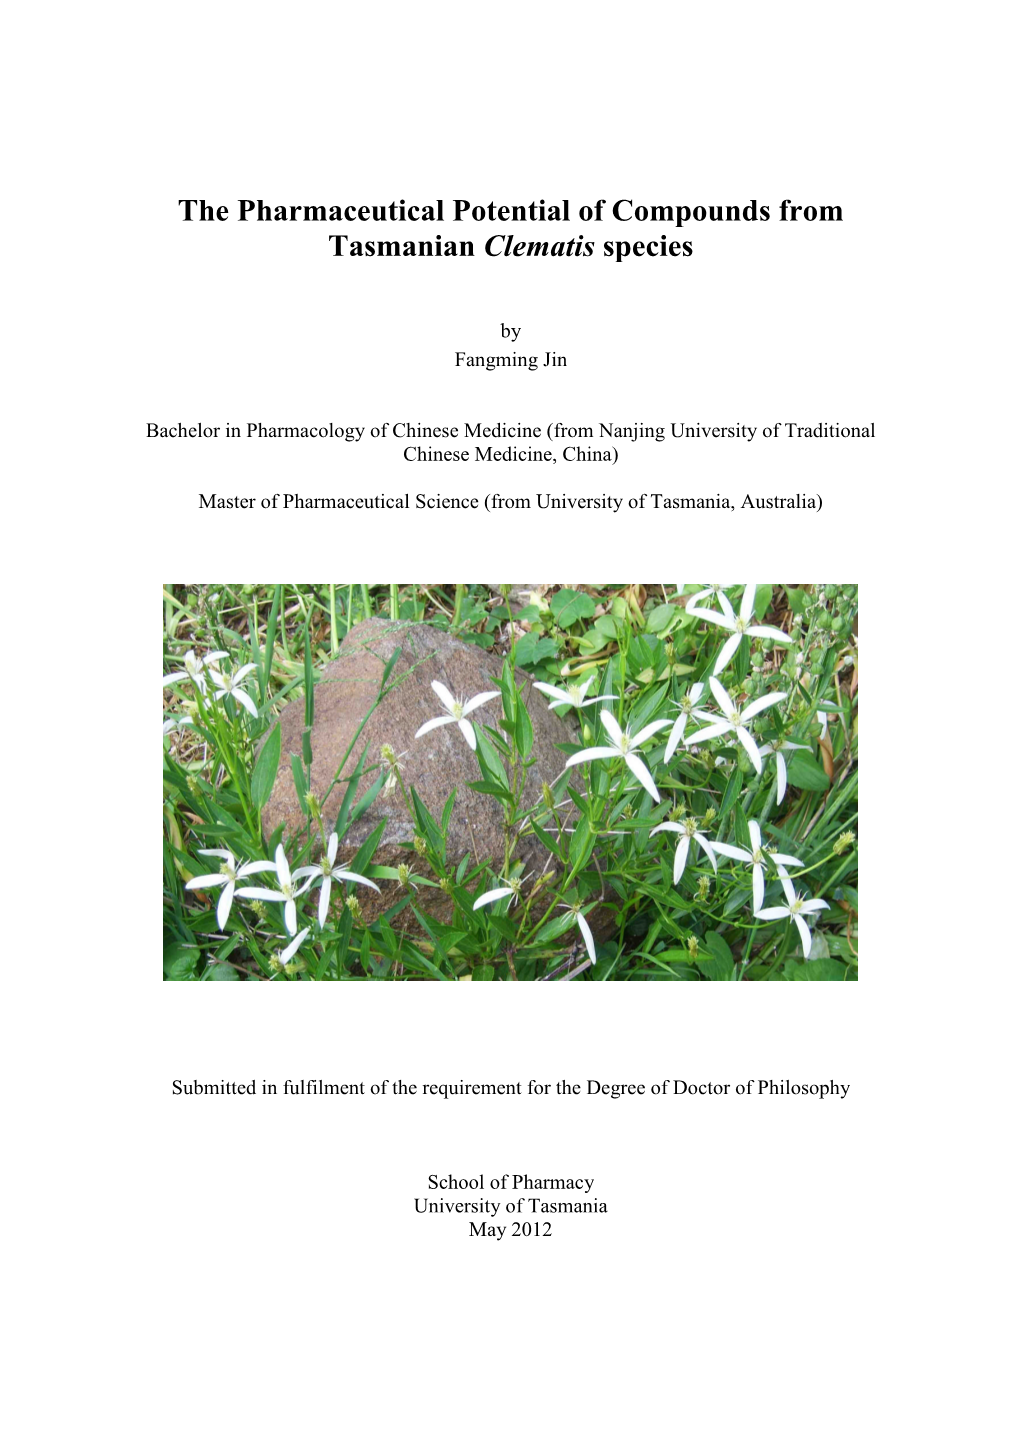 The Pharmaceutical Potential of Compounds from Tasmanian Clematis Species